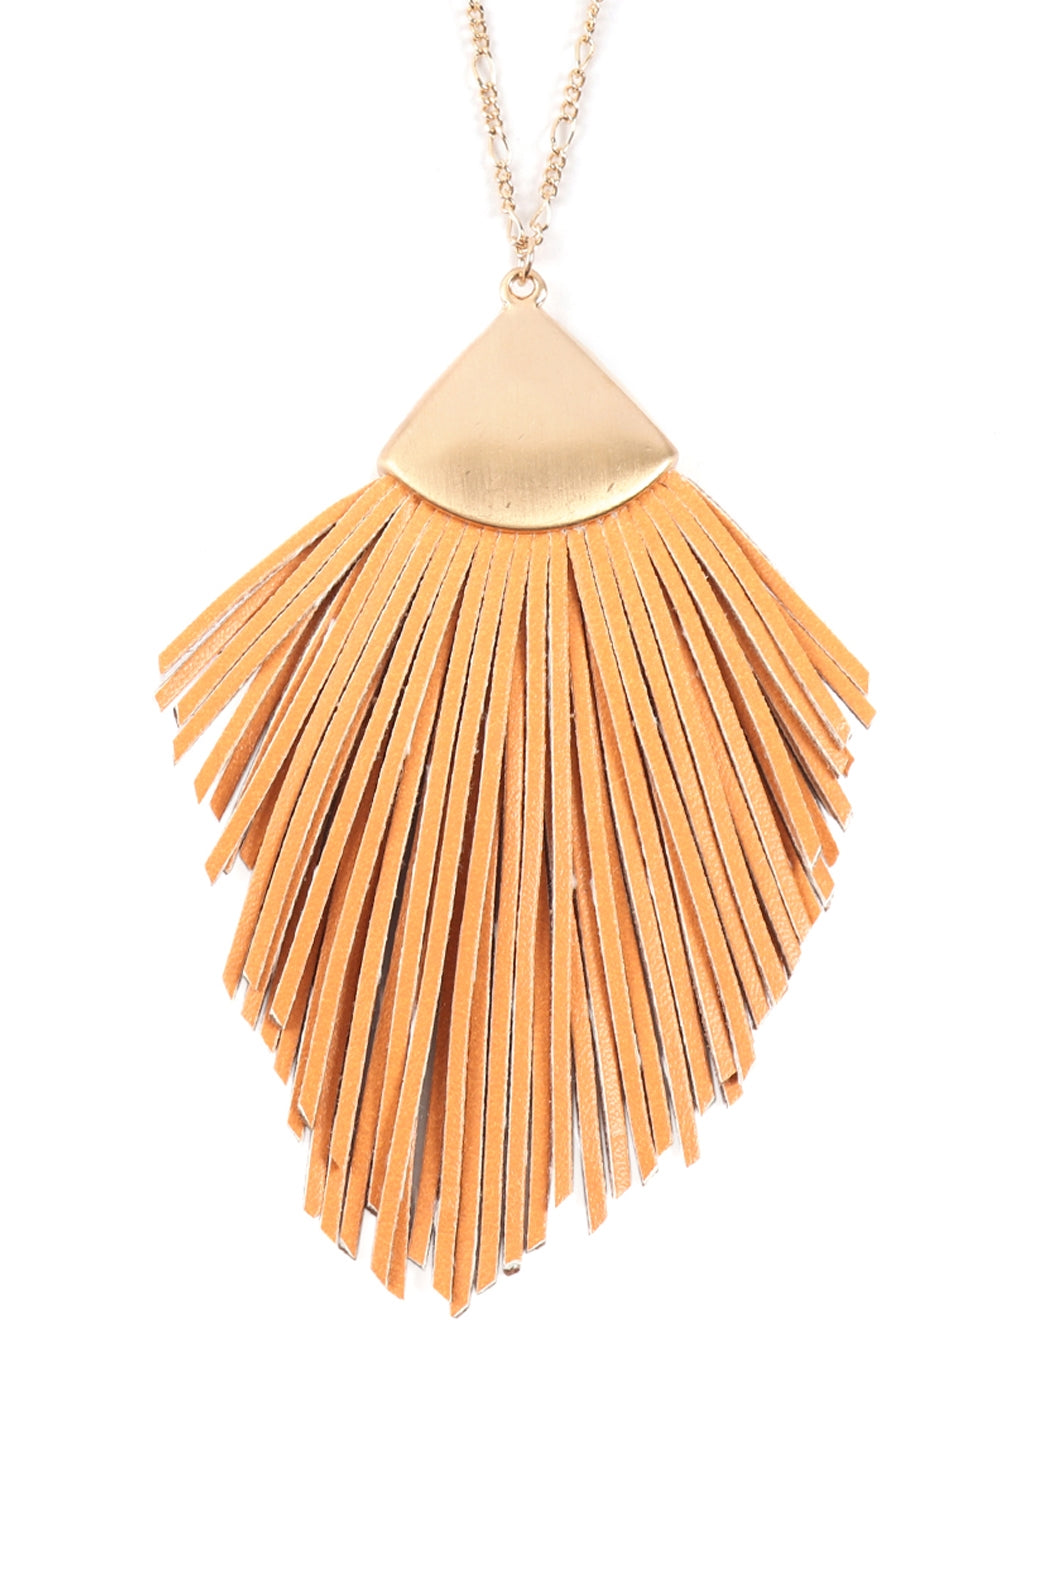 Feather leather tassle necklace-peach